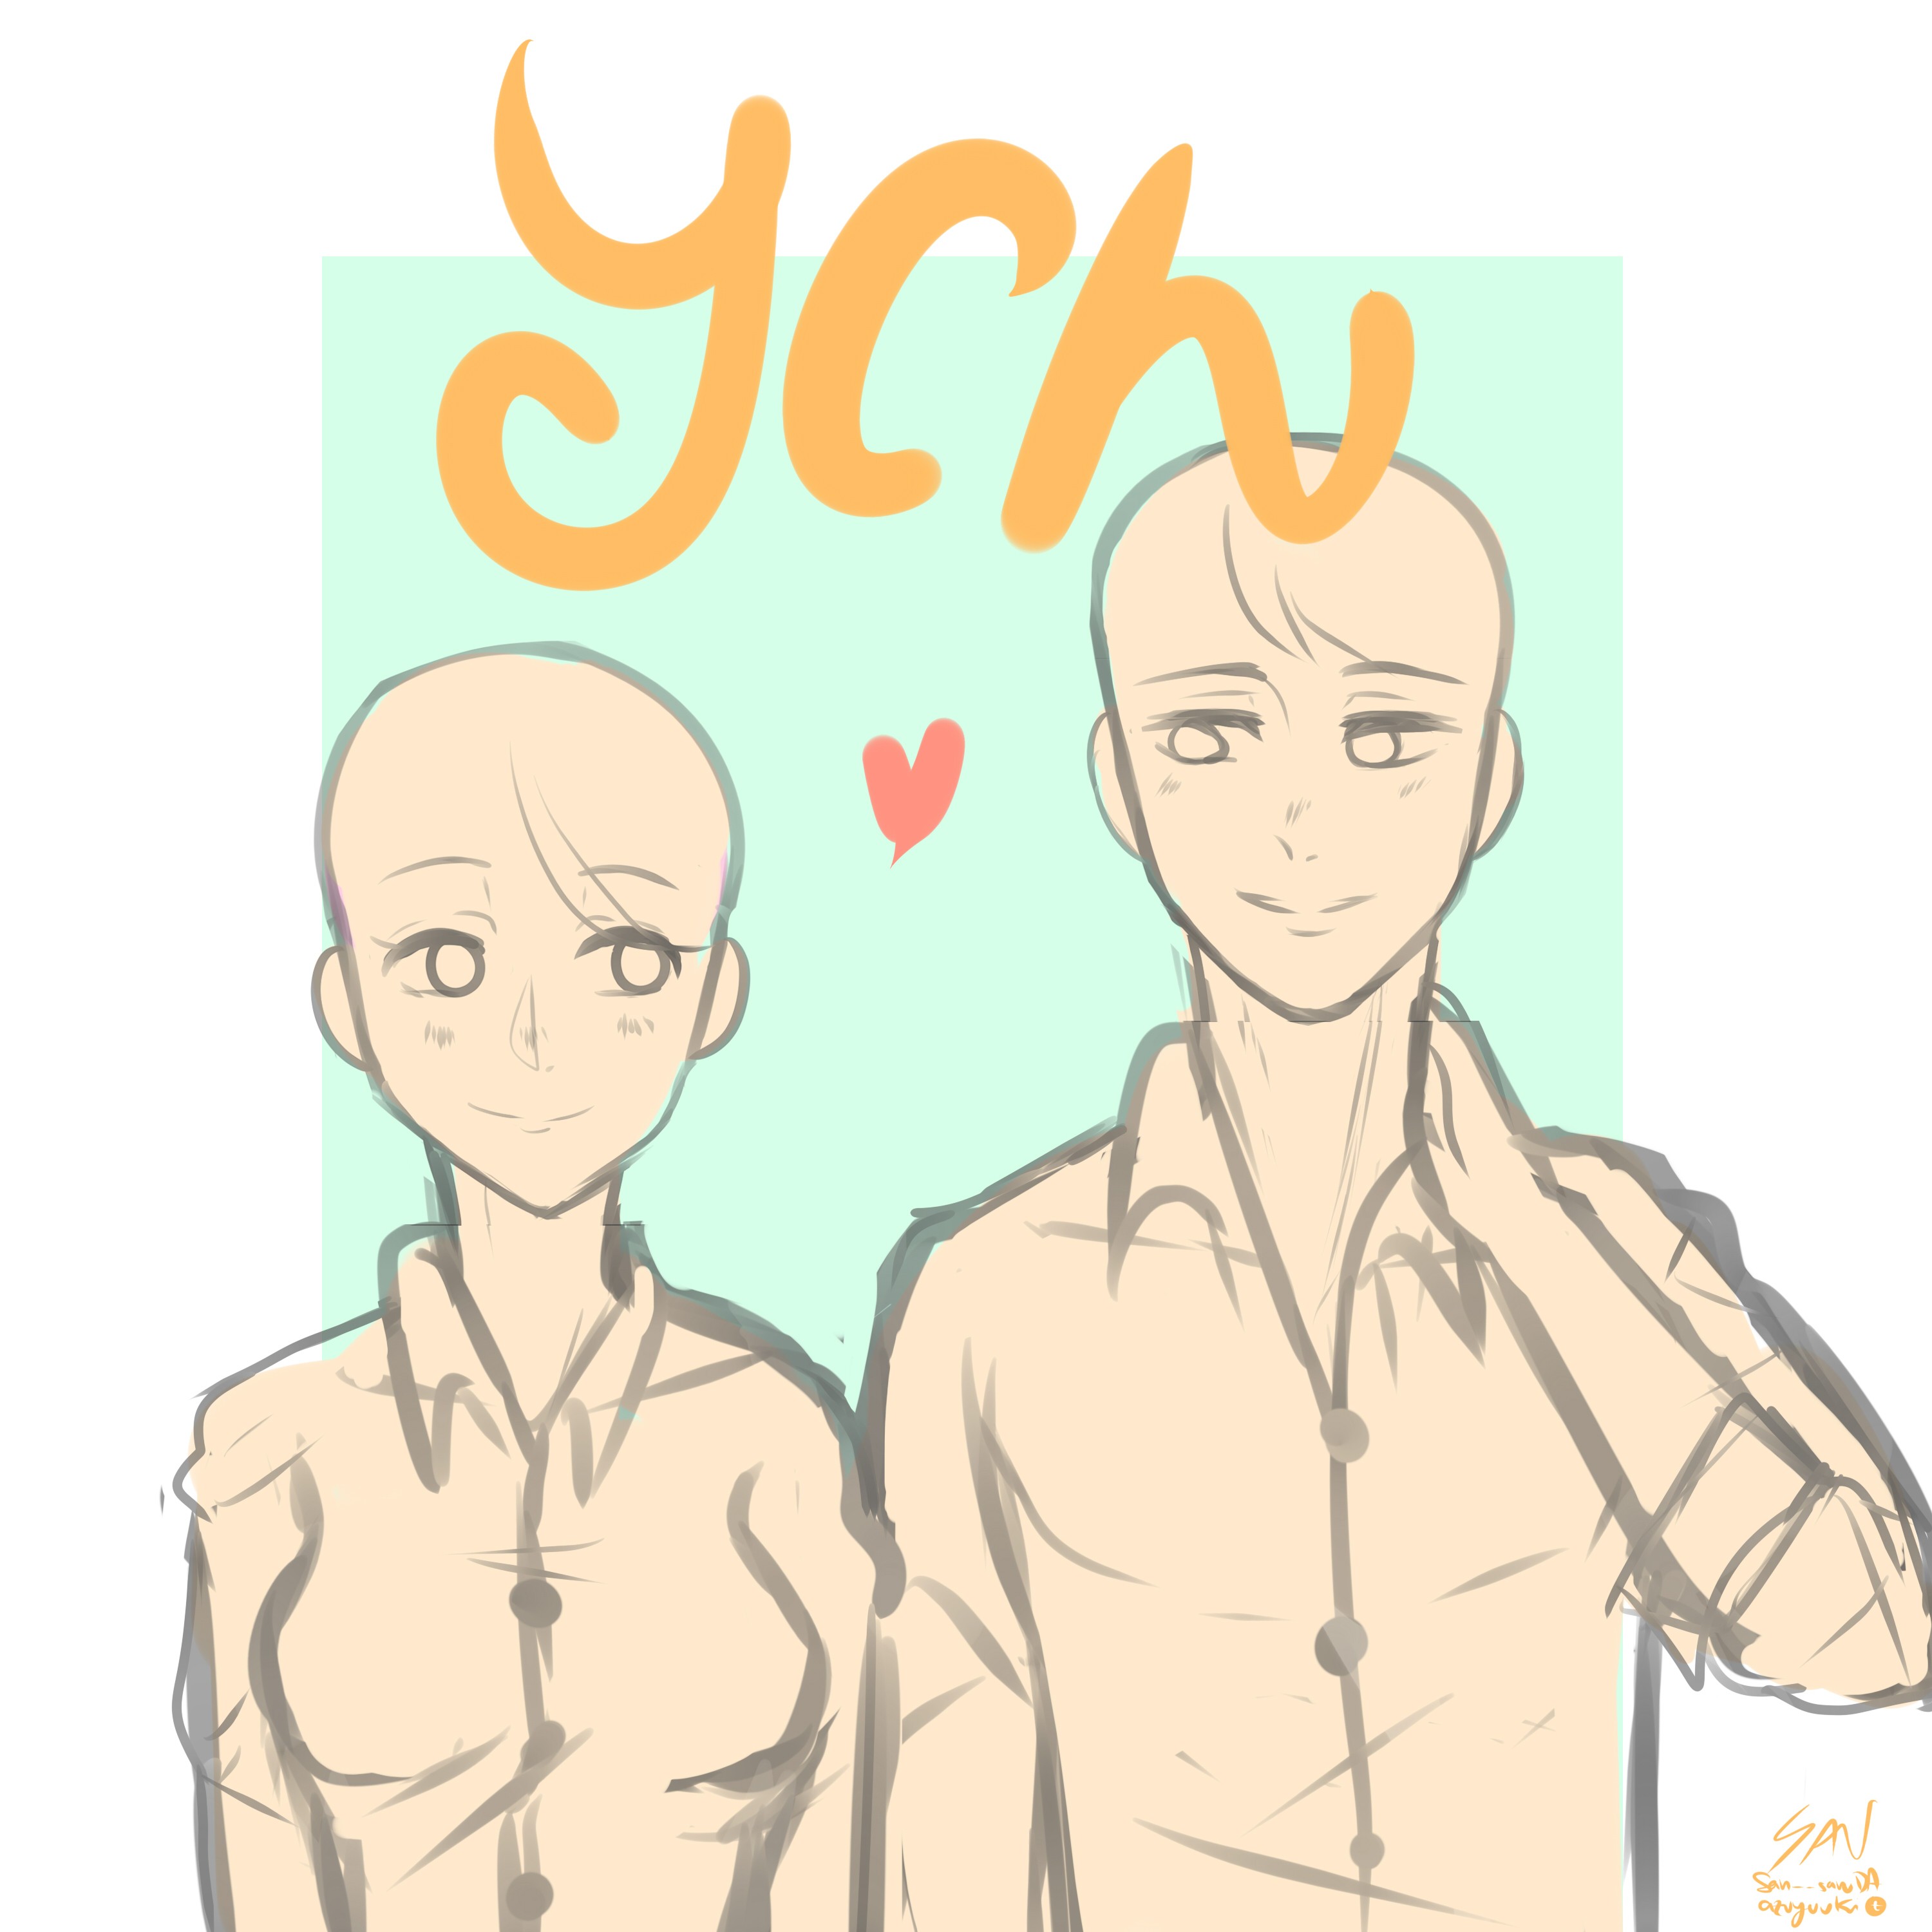 Fullcolor YCH [Cute couple] - YCH.Commishes.